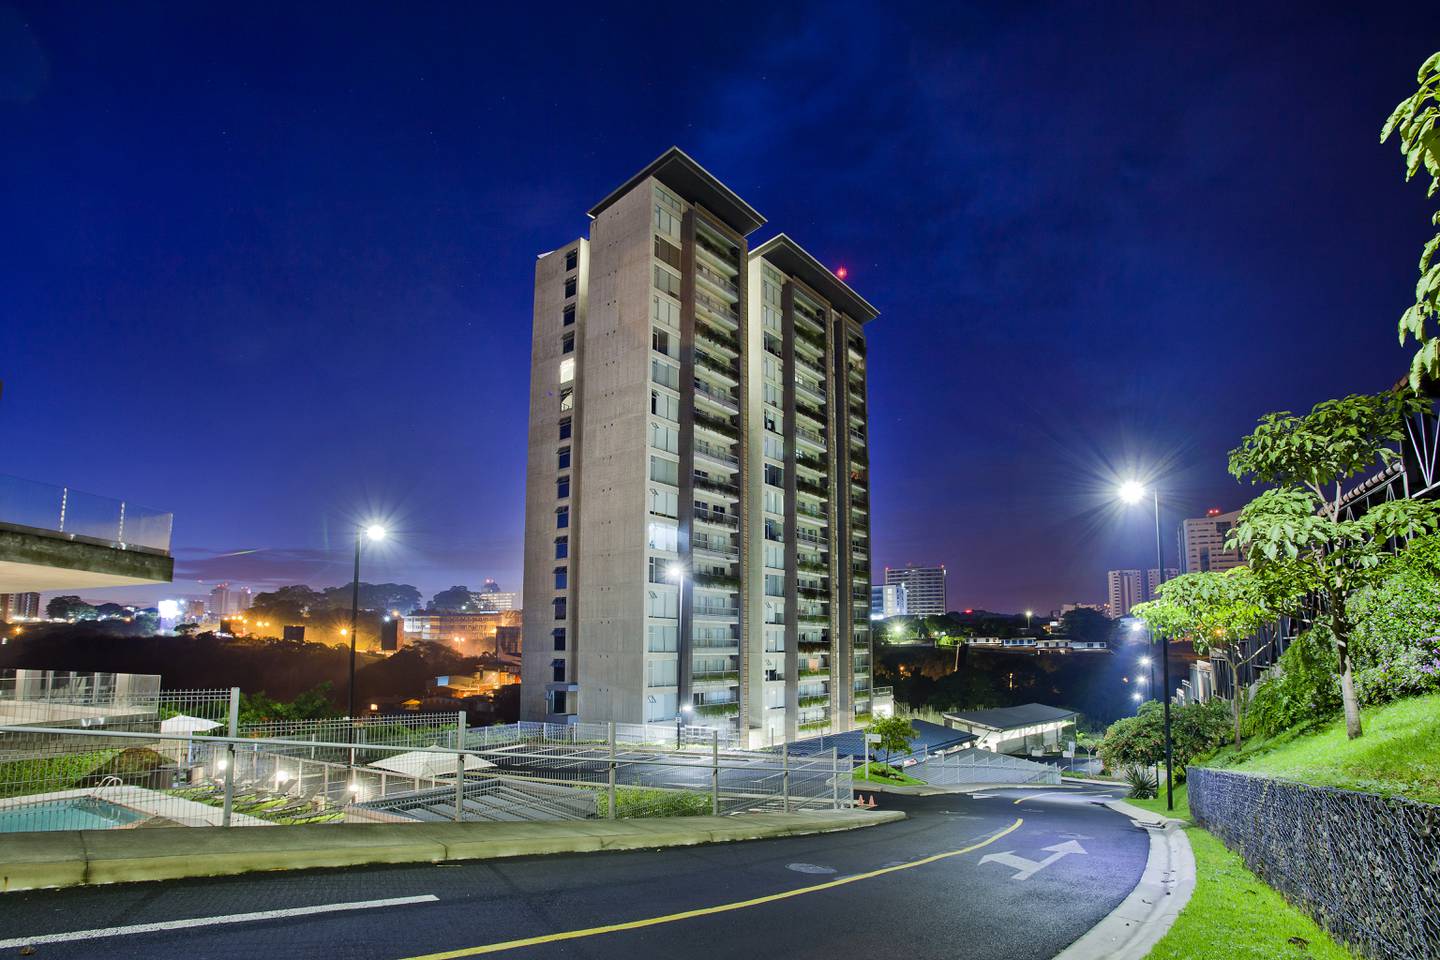 The smart apartments of Azenza Towers, located in La Uruca, range from $114,500 to $211,000, depending on the number of rooms.